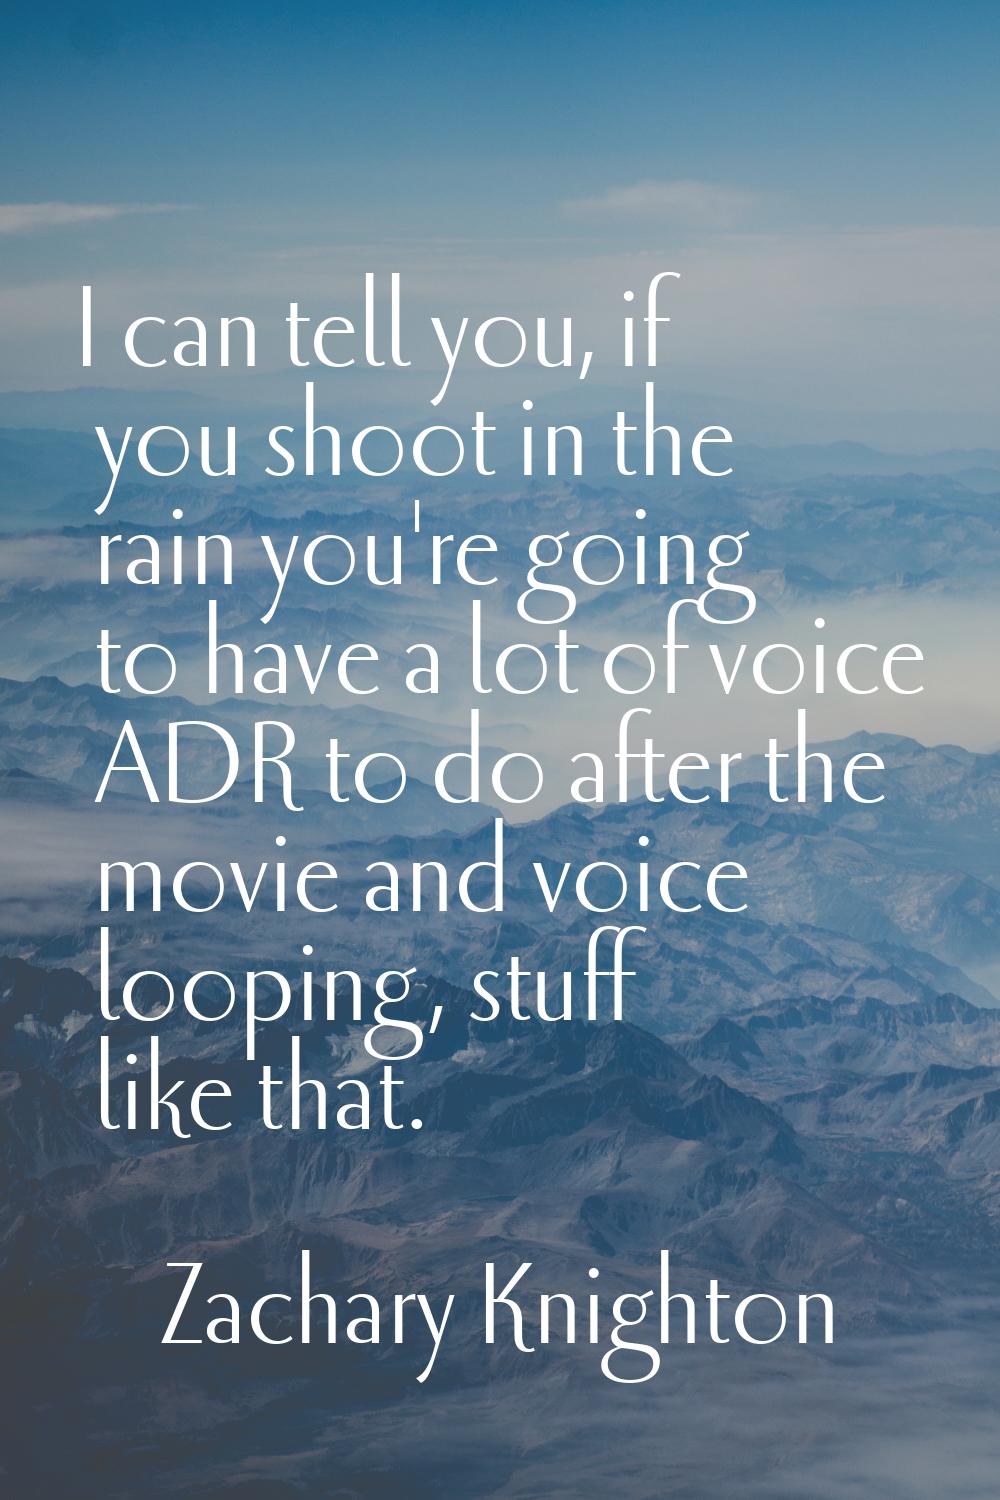 I can tell you, if you shoot in the rain you're going to have a lot of voice ADR to do after the mo